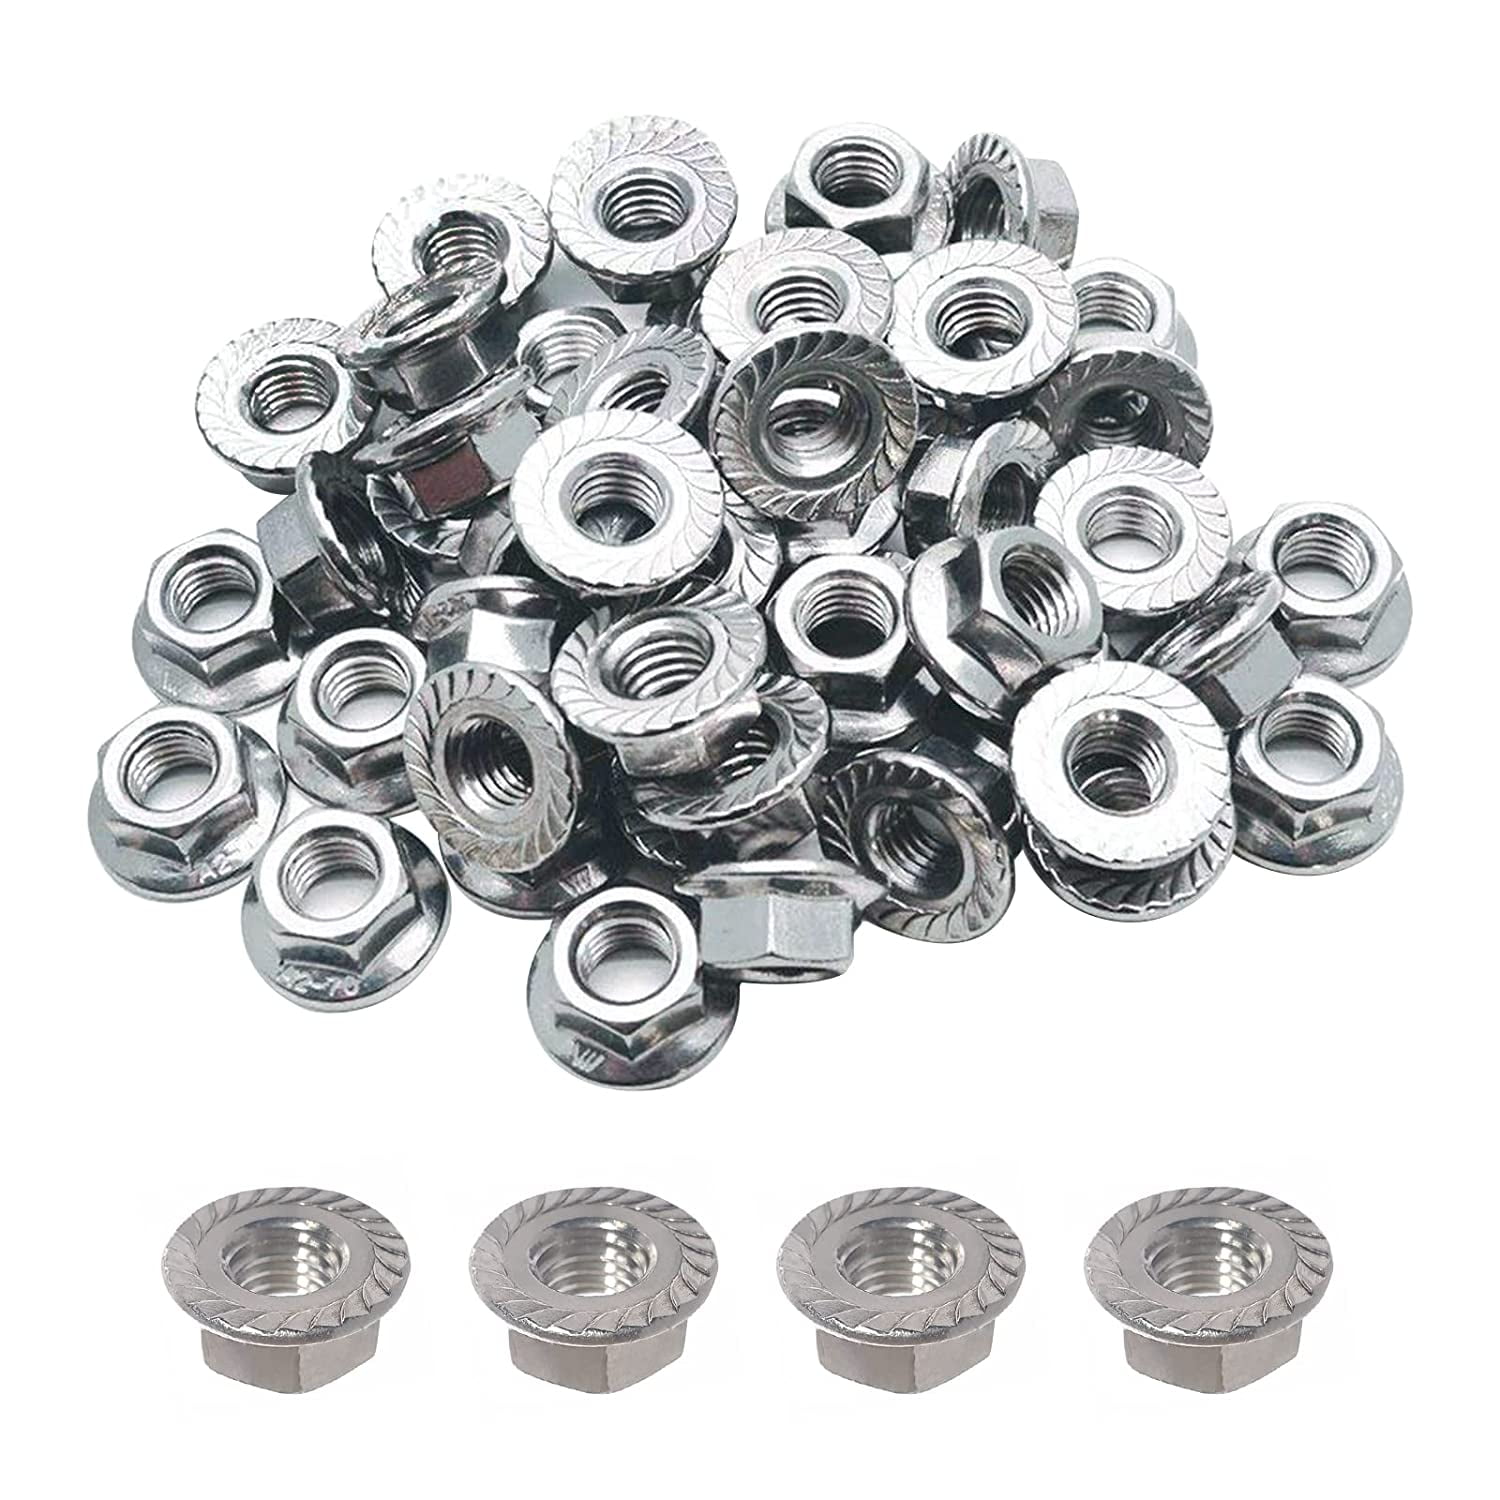 Zinc Plated Large Flange 1/4-20 Serrated Hex Lock Nuts 500 